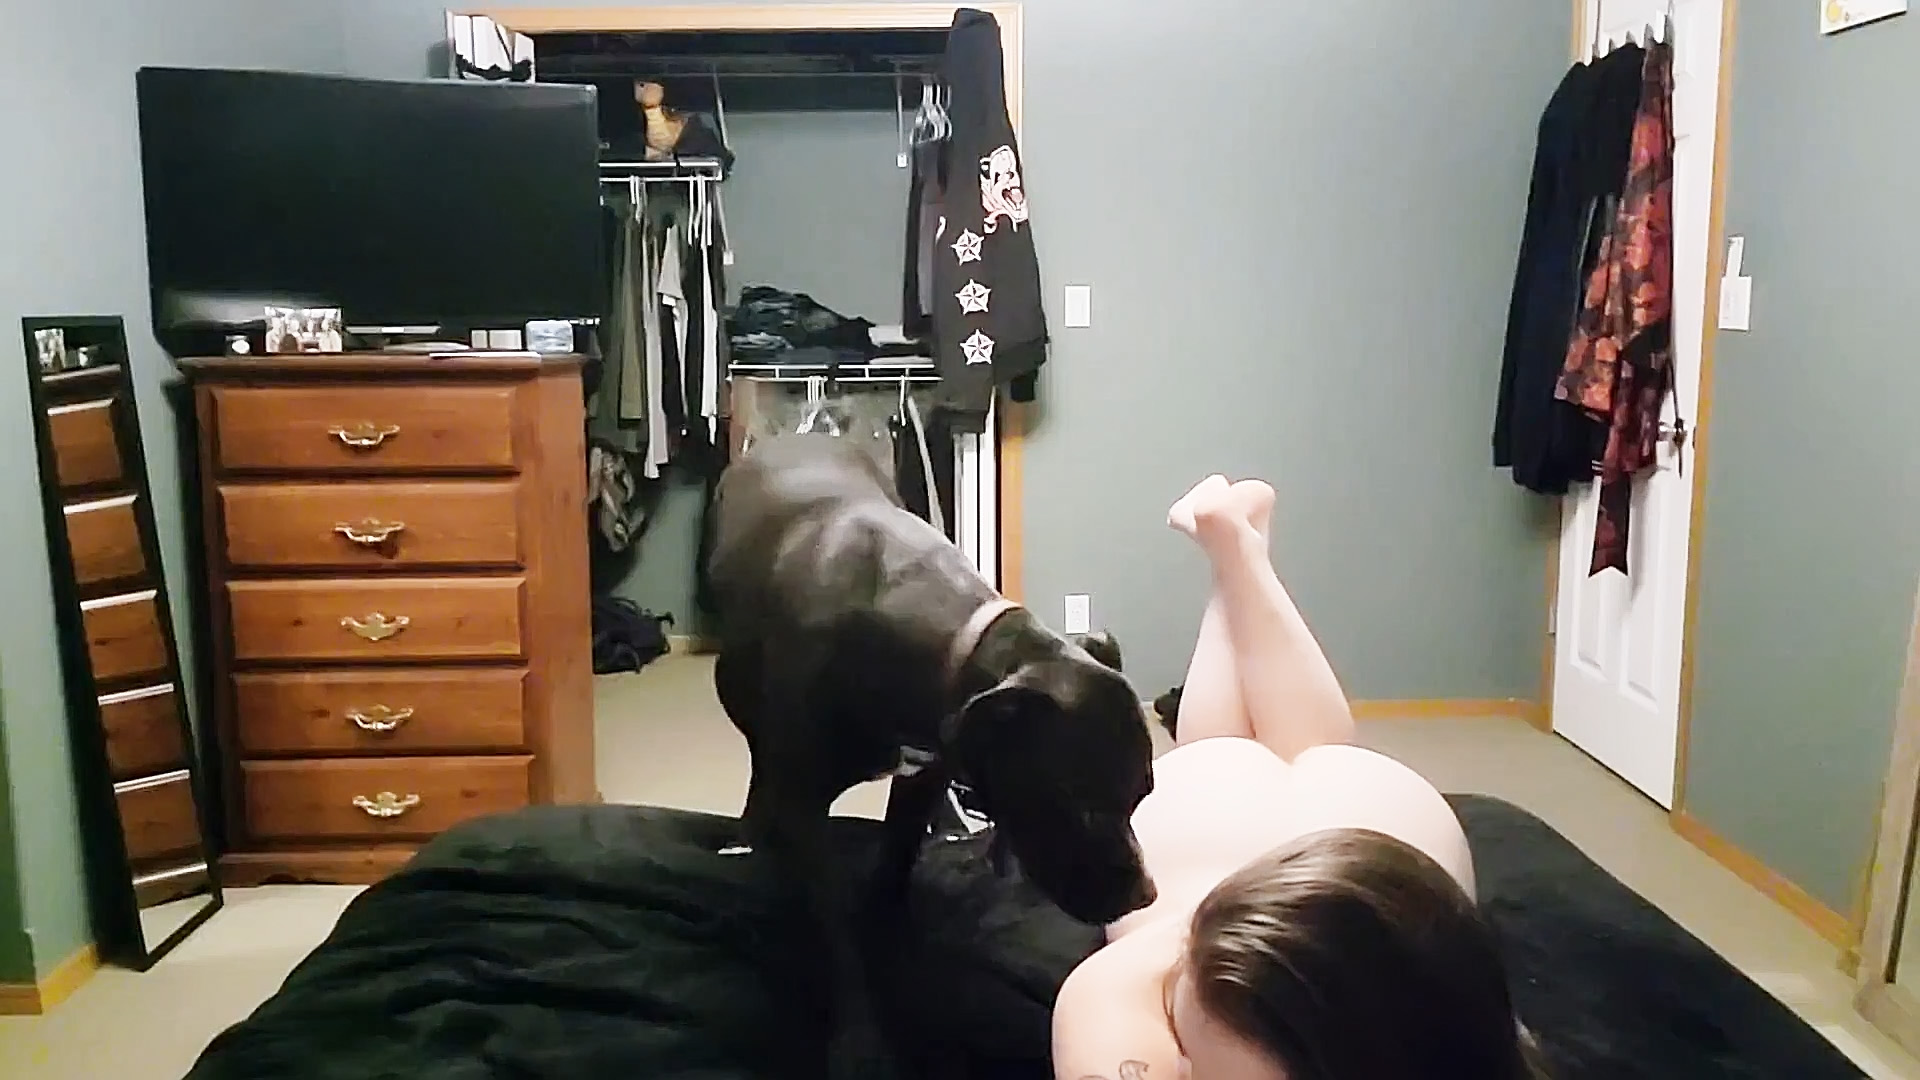 Animal Sex Ante Video - Full nude girl dancing with her dog for the hidden camera | AREA51.PORN